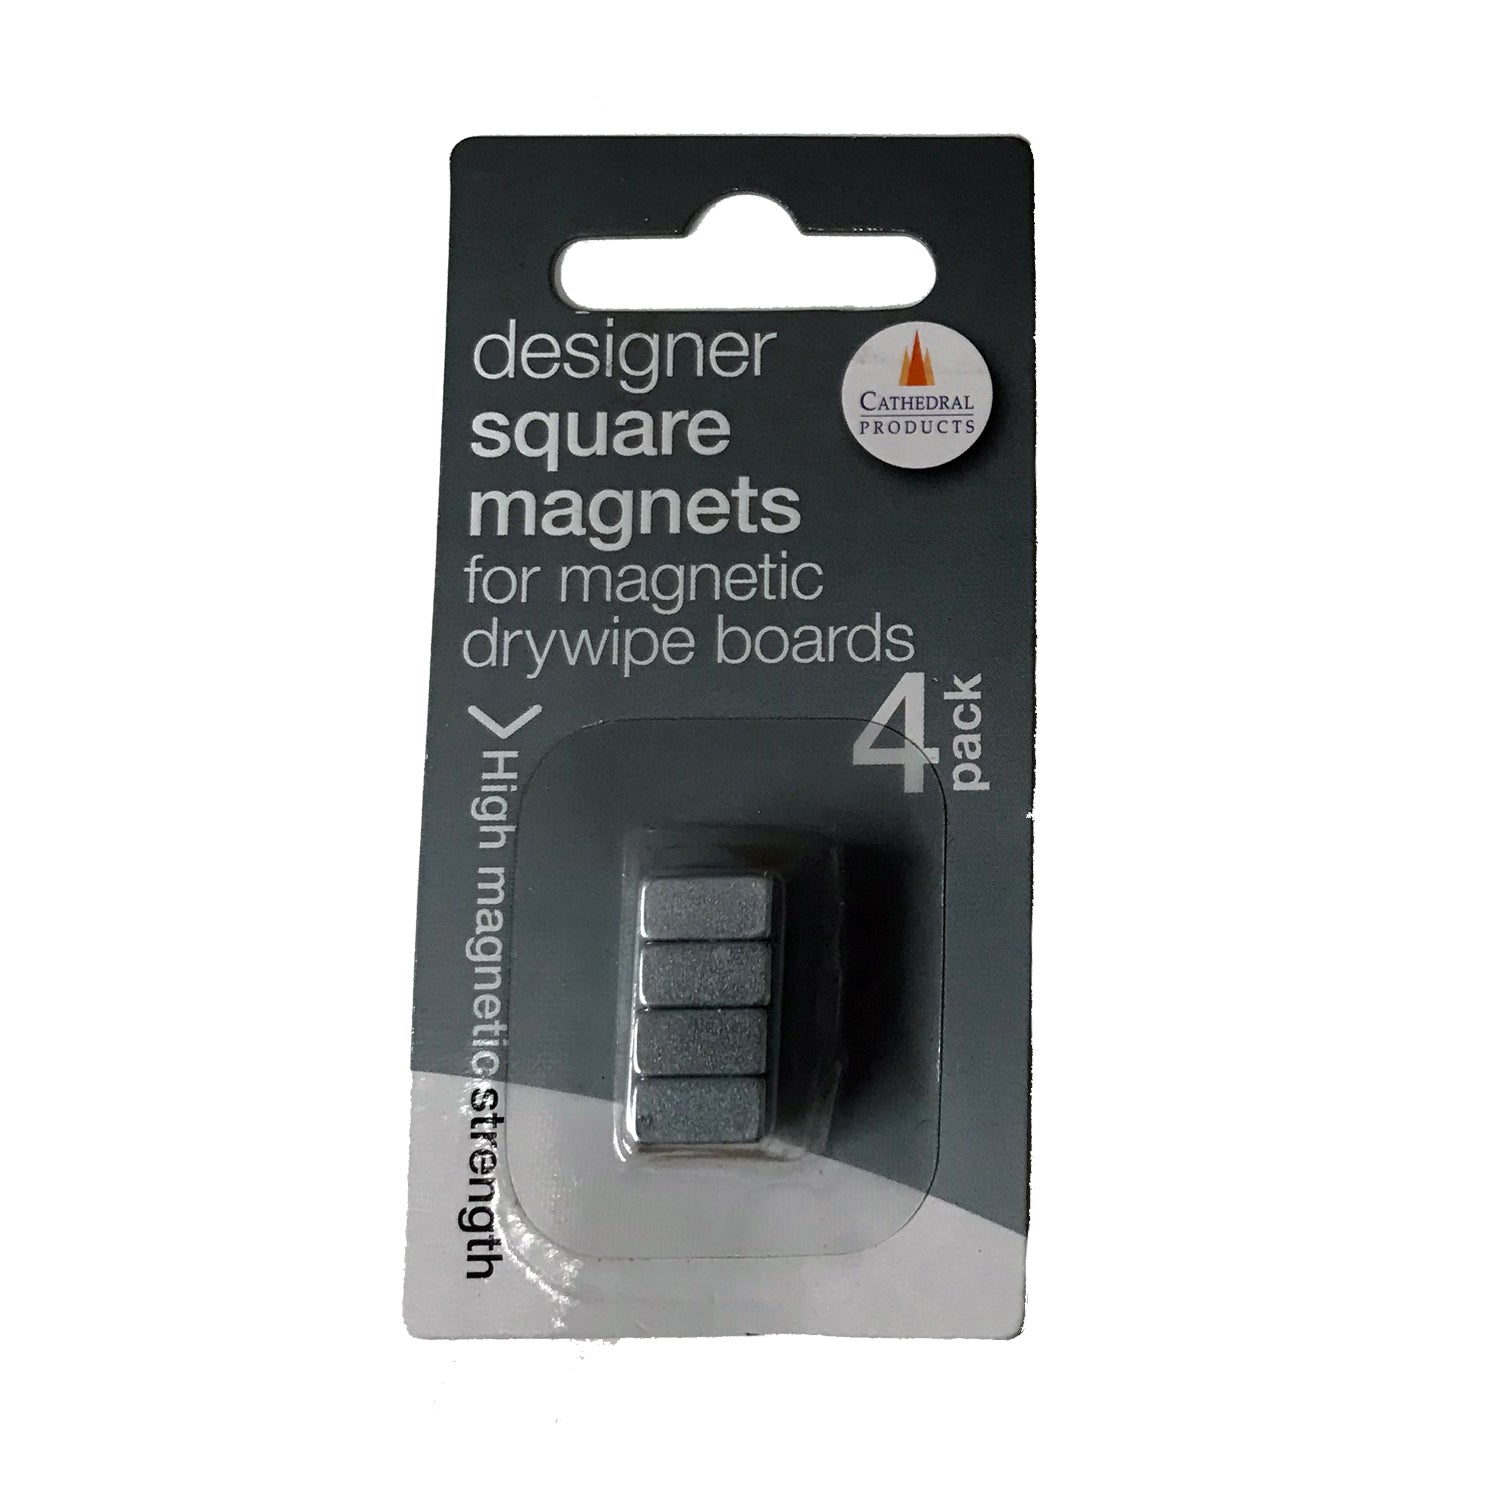 Packaging of Cathedral Products' designer square magnets for magnetic drywipe boards. The pack contains four high-strength neodymium magnets, displayed through a clear window on the blister packaging.